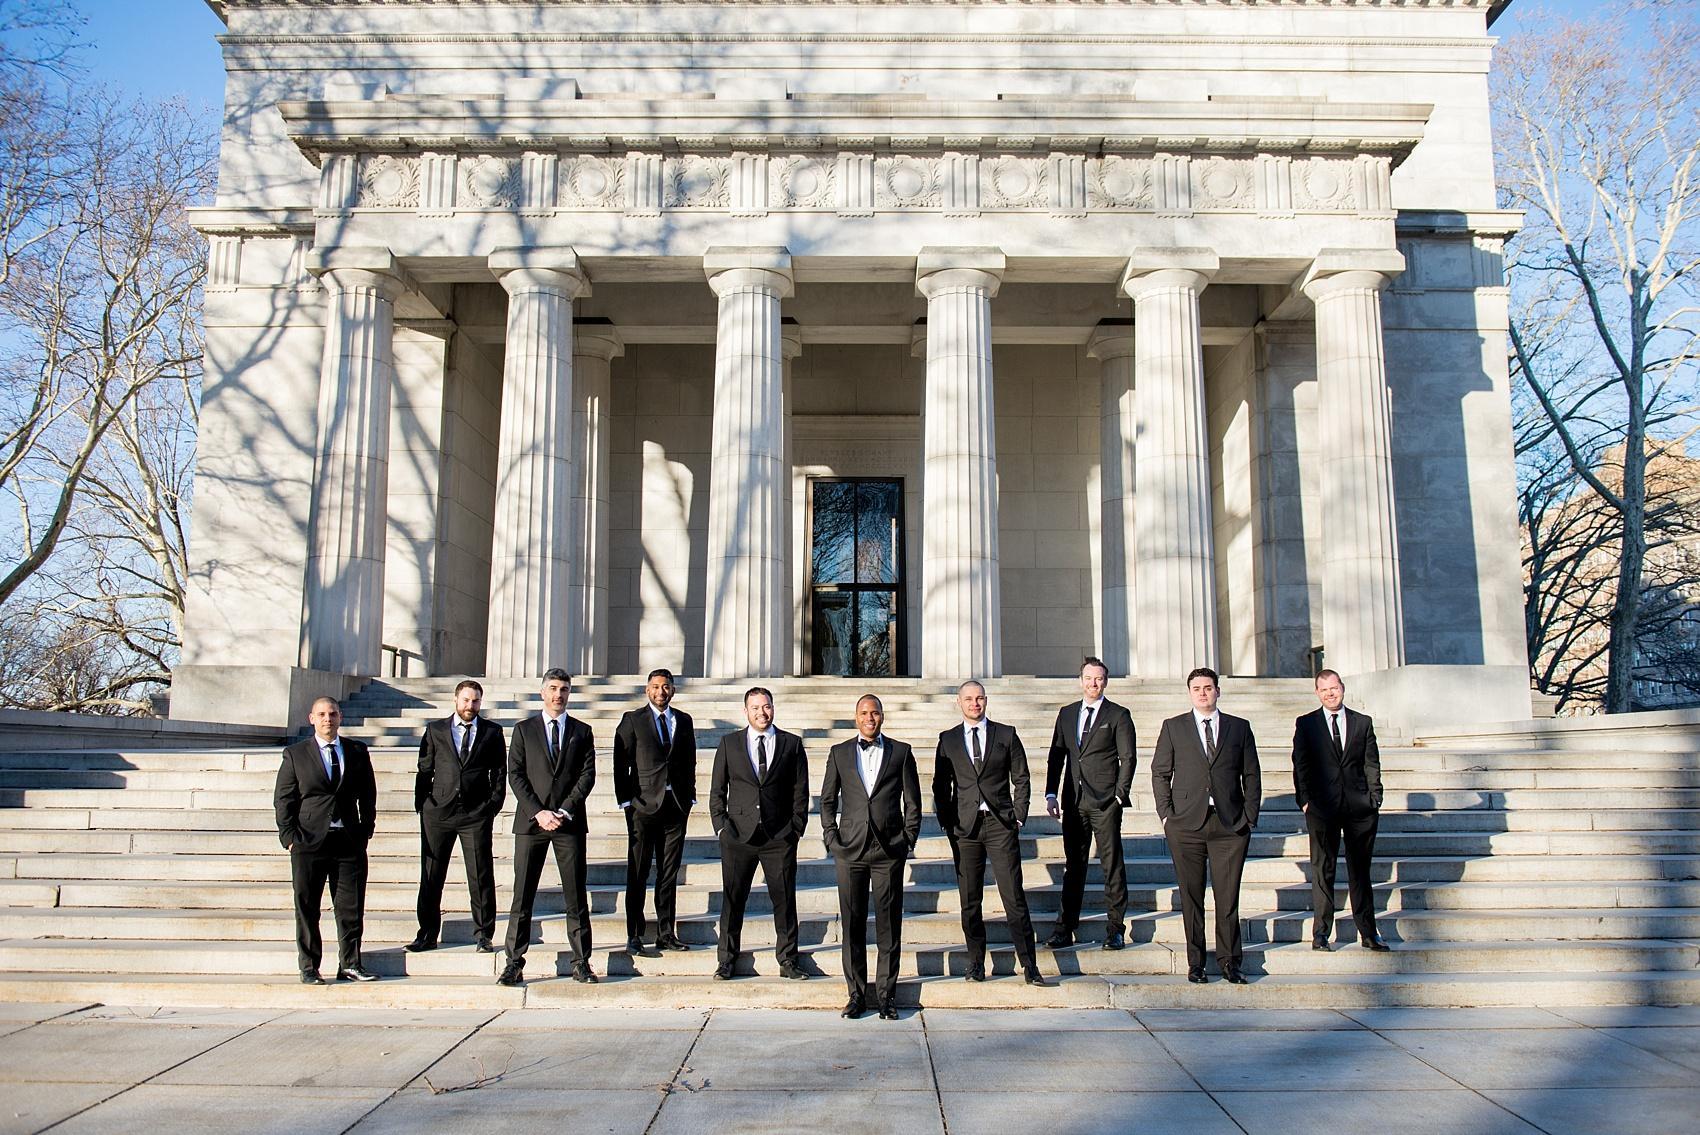 Groomsmen photo with iconic columns on the Upper West Side in NYC. Image by Mikkel Paige Photography.